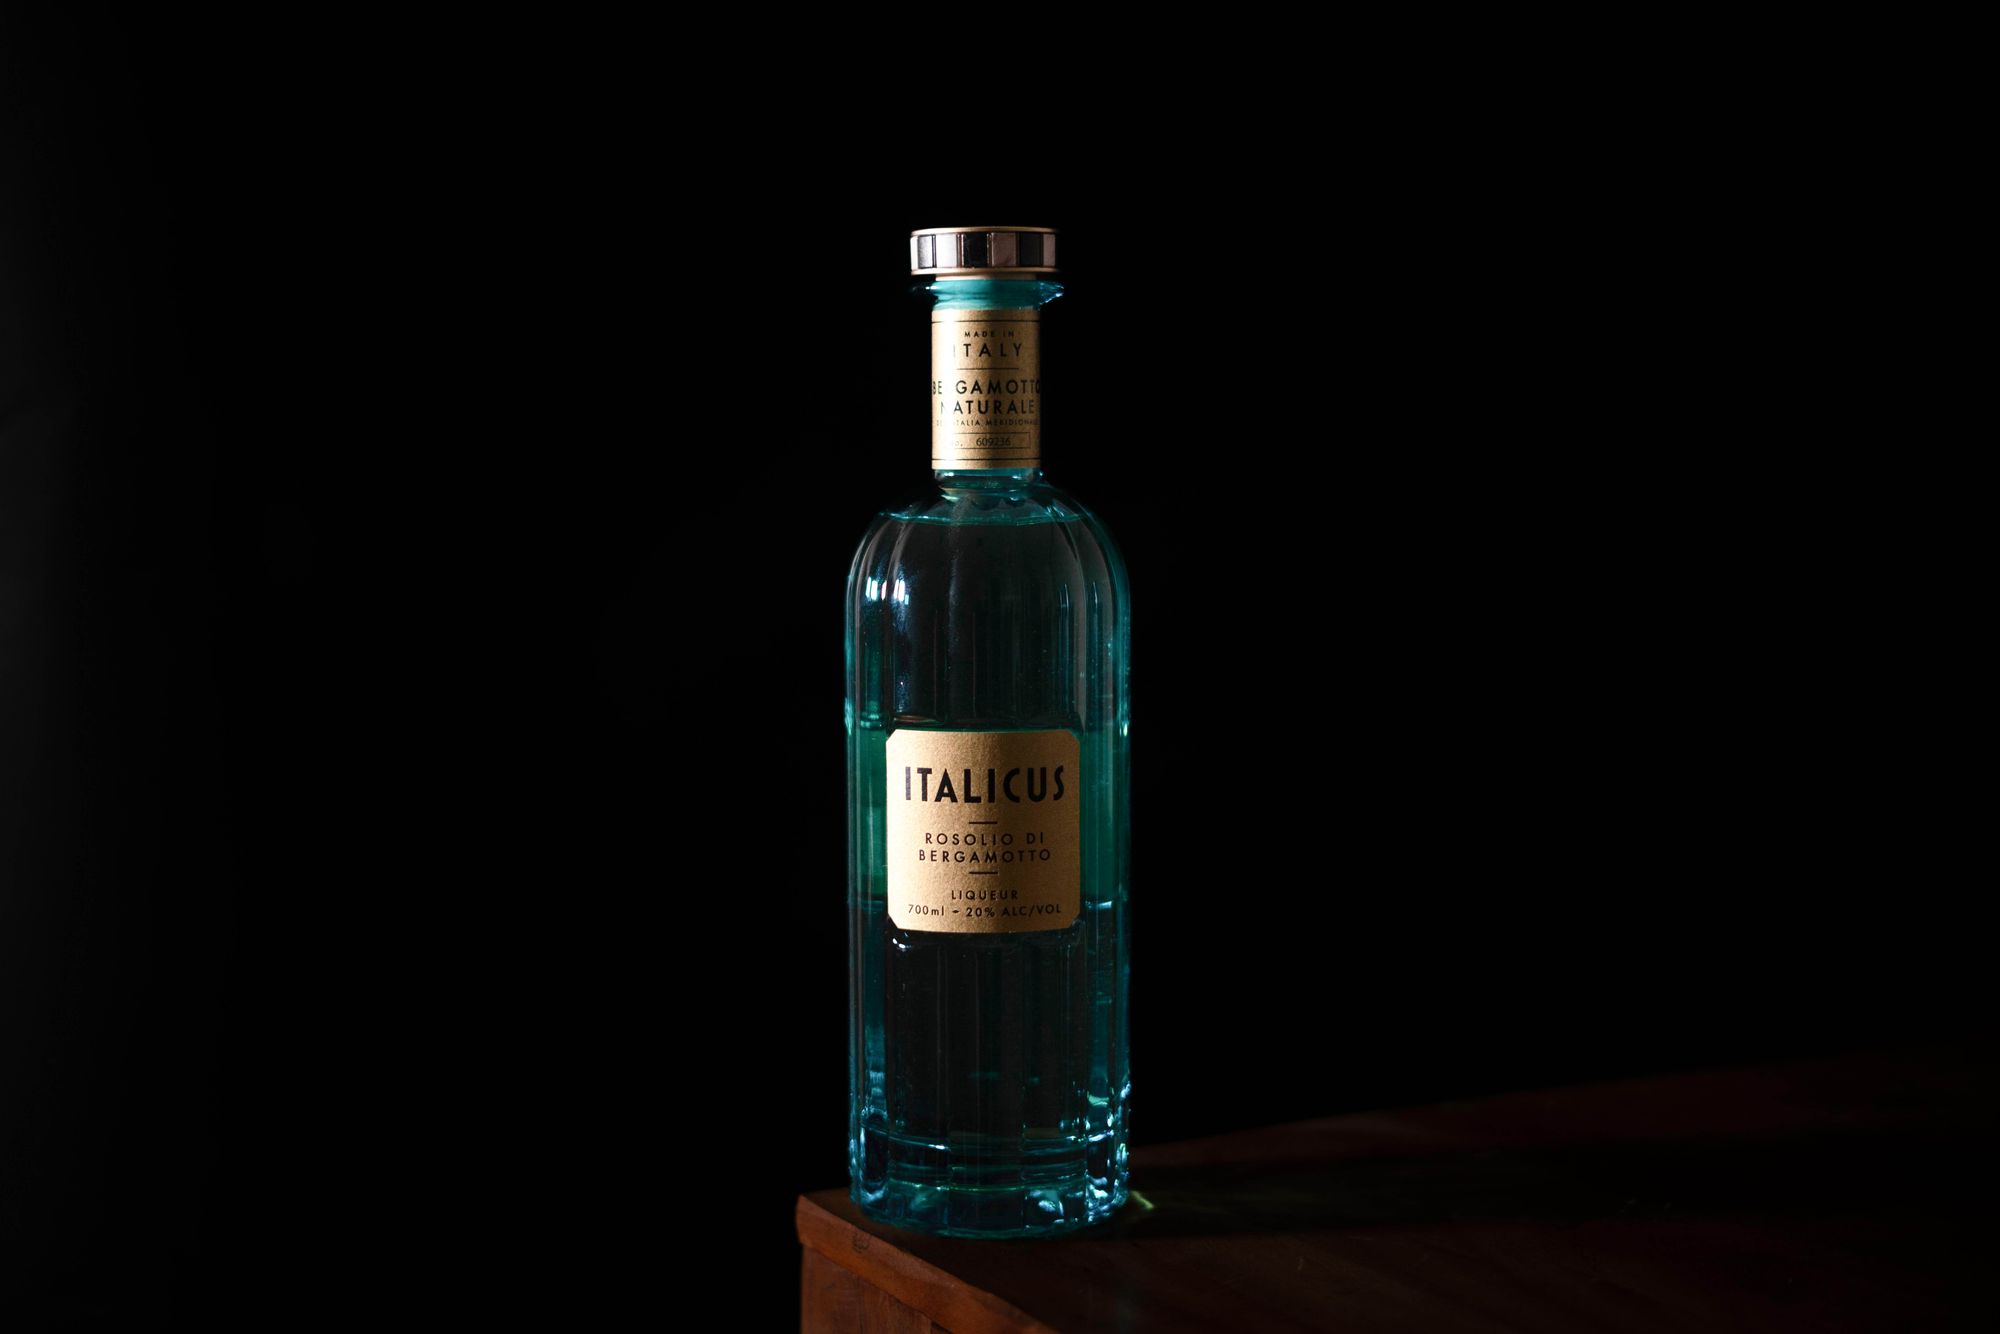 Italicus. Photo: Boothby